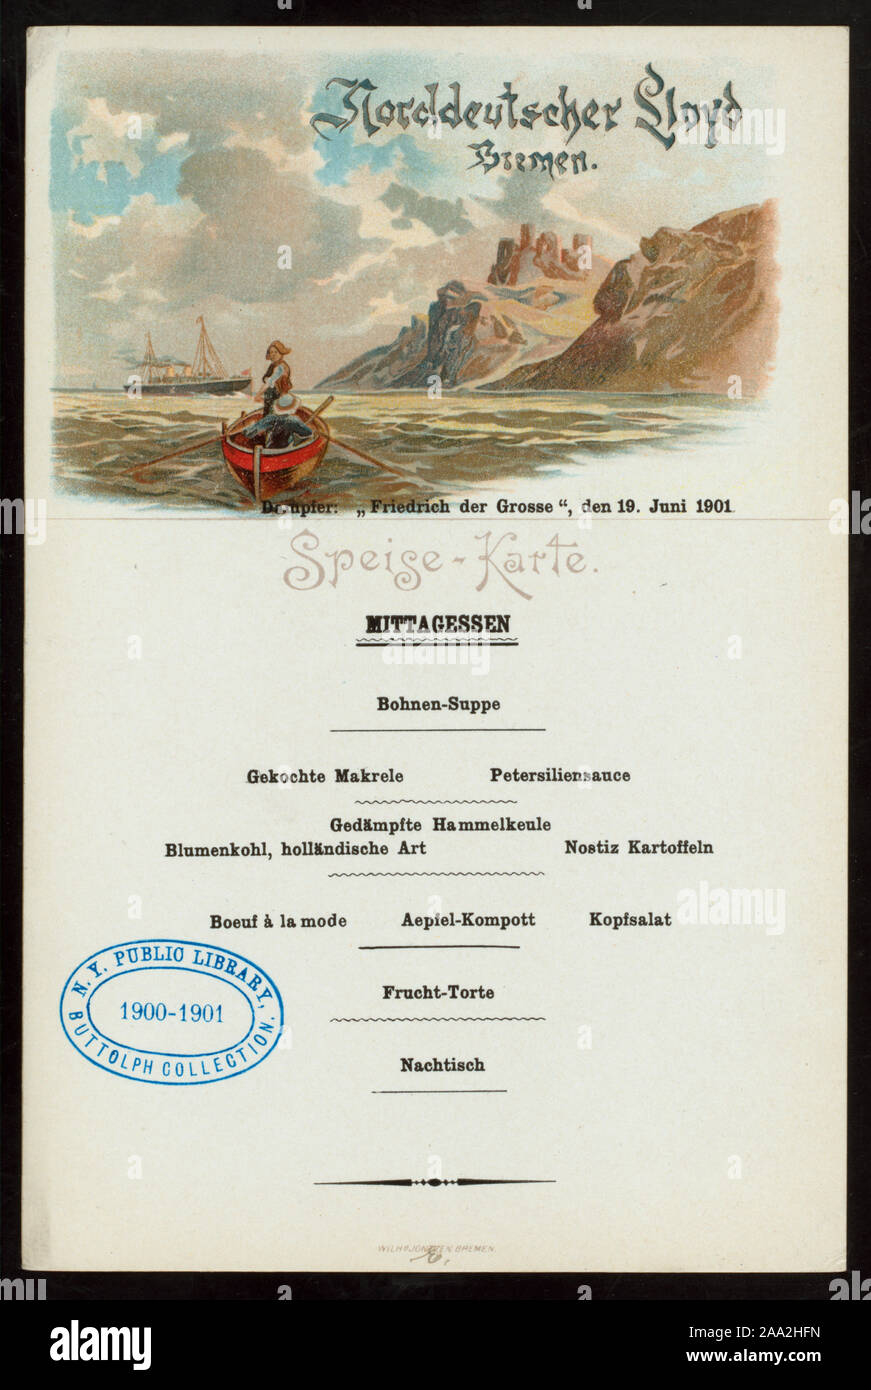 GERMAN & ENGLISH; CONCERT PROGRAM ON BACK COVER; ILLUSTRATION OF LARGE STEAMSHIP AT SEA Citation/Reference: 1901-1687A; [?LUNCH?] [held by] NORDDEUTSCHER LLOYD BREMEN [at] SS FRIEDRICH DER GROSSE (SS;) Stock Photo